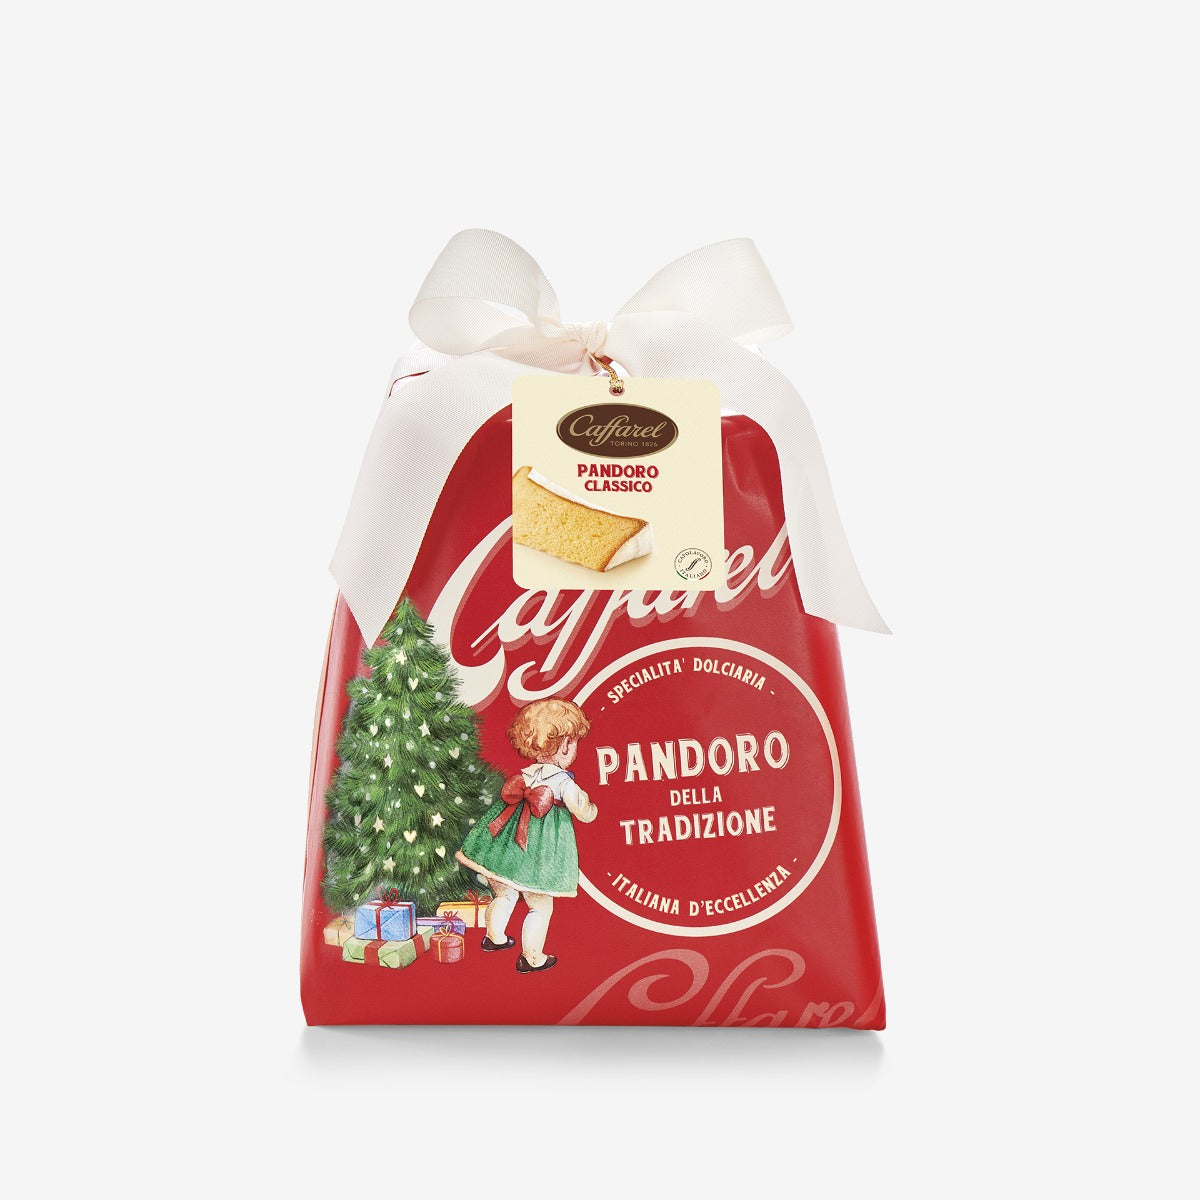 Pandoro in gift package